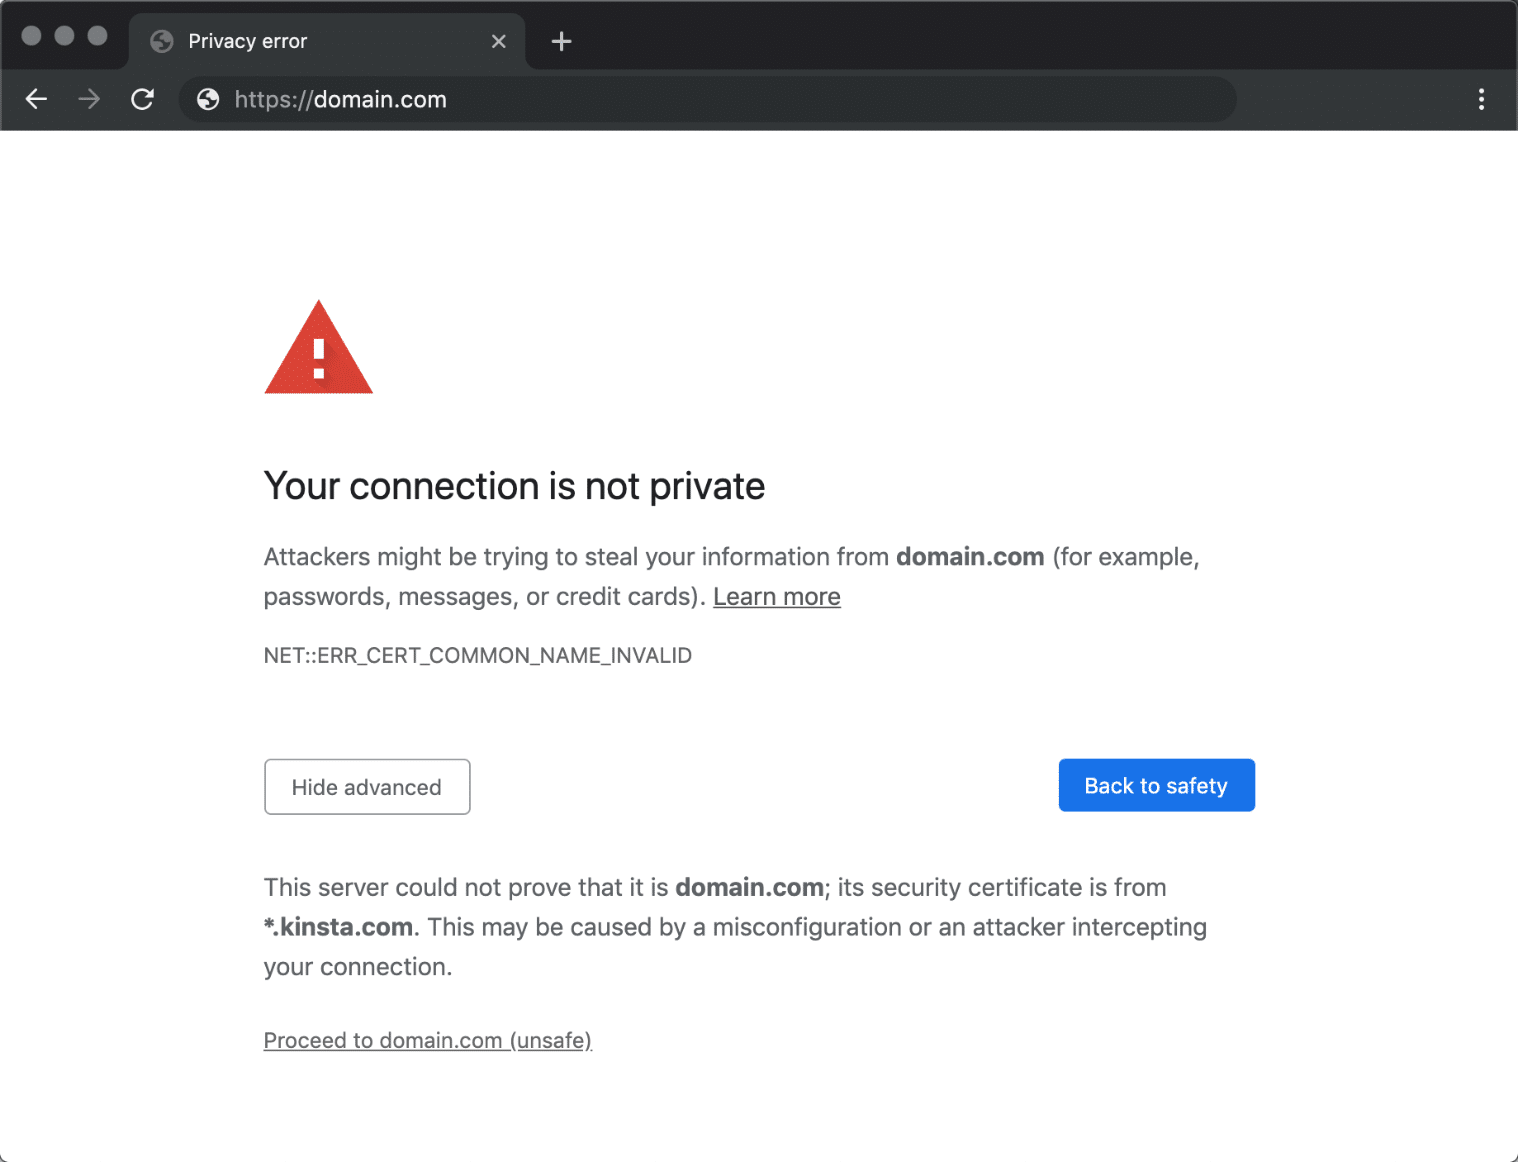 “Your Connection is not private" Error in Chrome